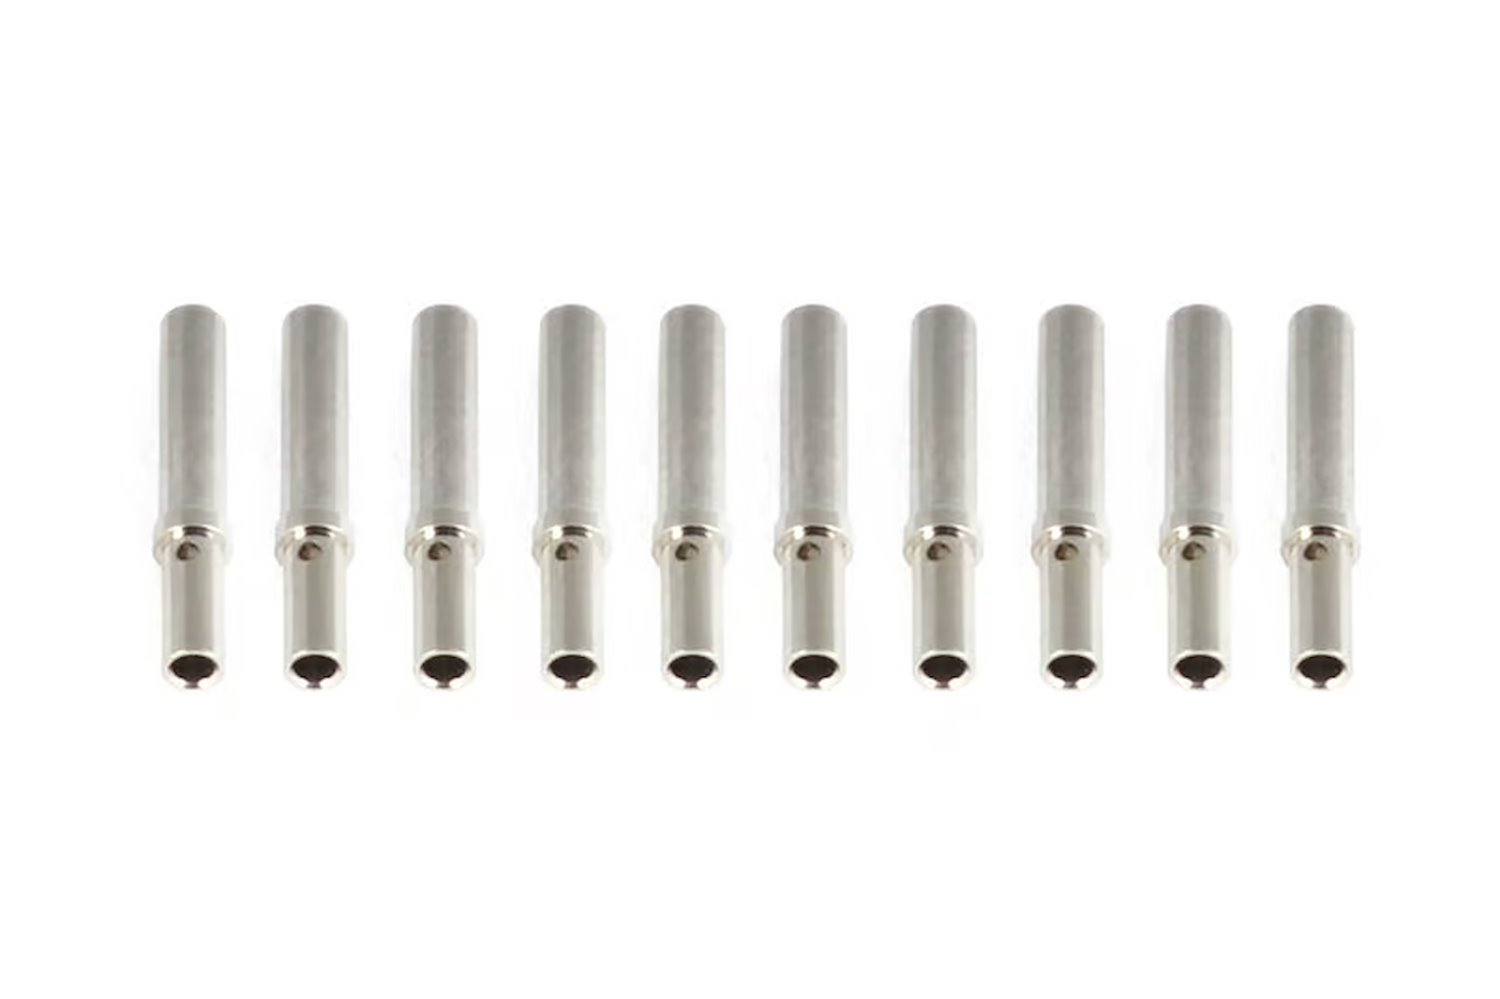 HT-031119 Pins Only, Female-Pins to Male Deutsch DT Series Connectors